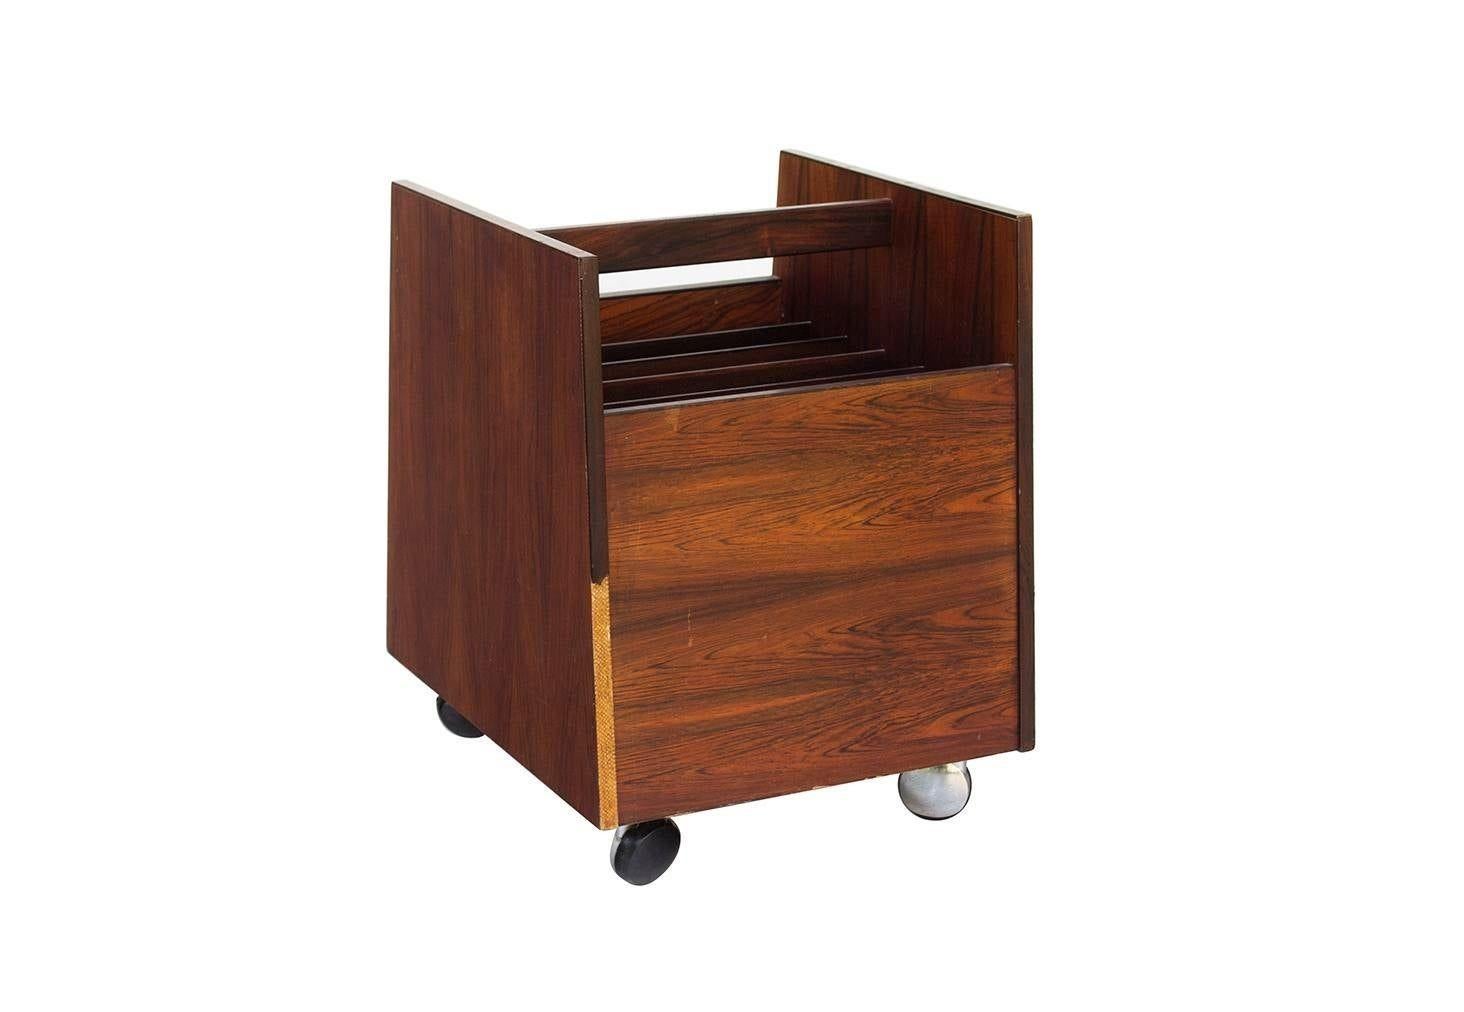 Scandinavian Modern Rolling Lp Record or Magazine Caddy in Rosewood by Bruksbo For Sale